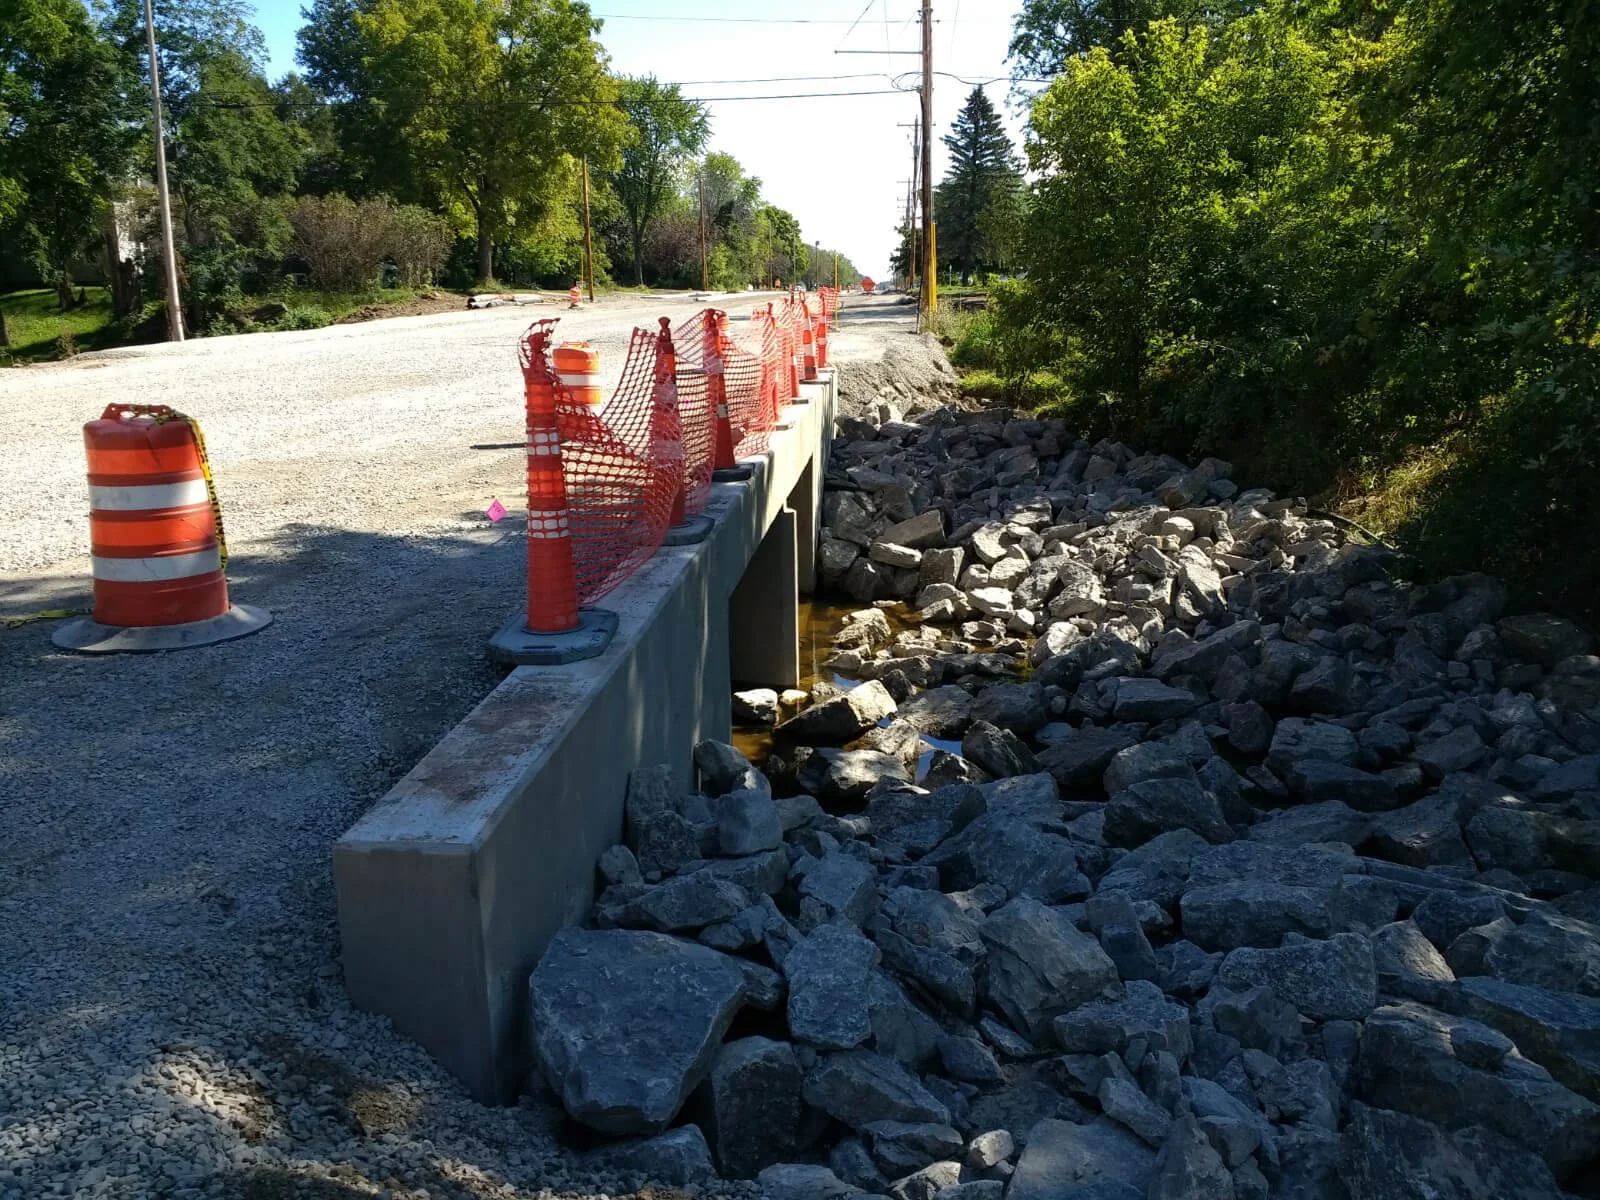 Construction cones and netting make a temporary barrier between the side of a road and a ditch full of large stones